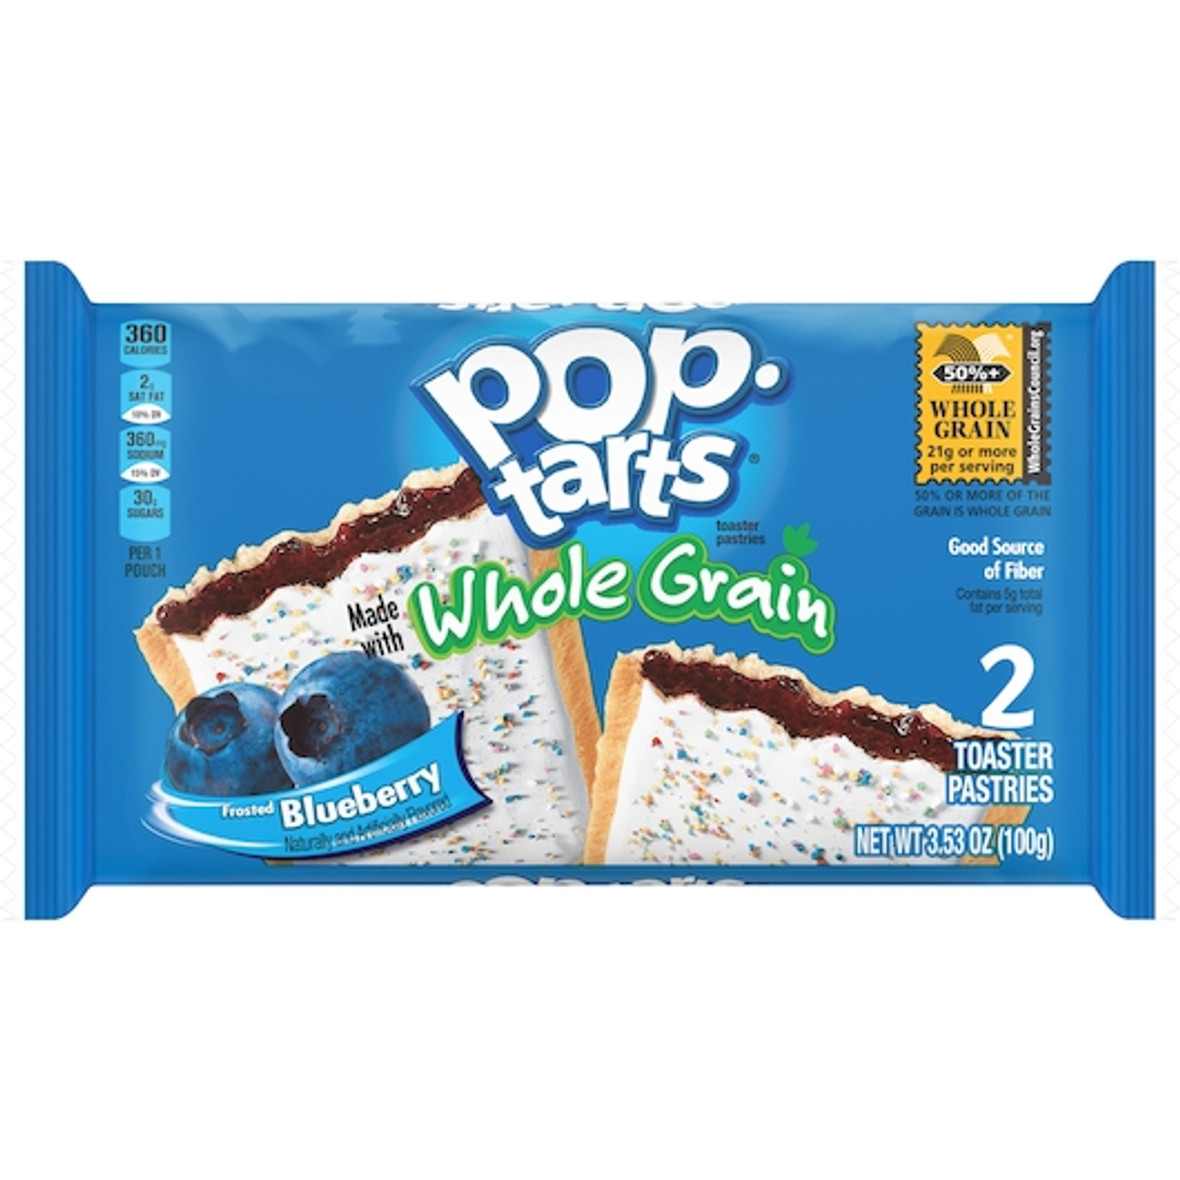 Kellogg s Whole Grain Frosted Blueberry Pastry, 3.3 Ounce, 6 Per Box, 12 Per Case